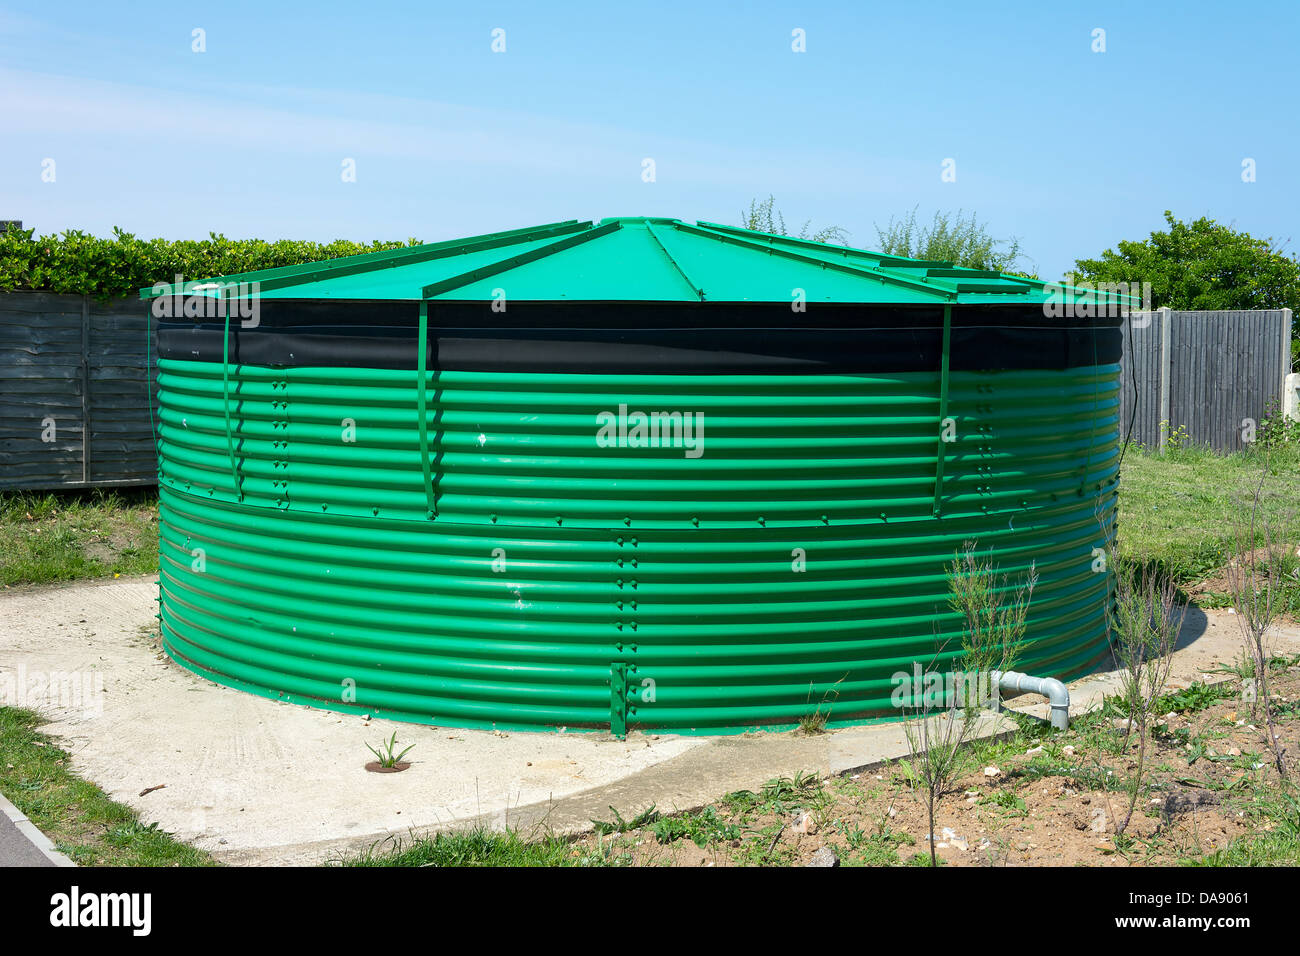 Large water storage tank as part of irrigation system Stock Photo